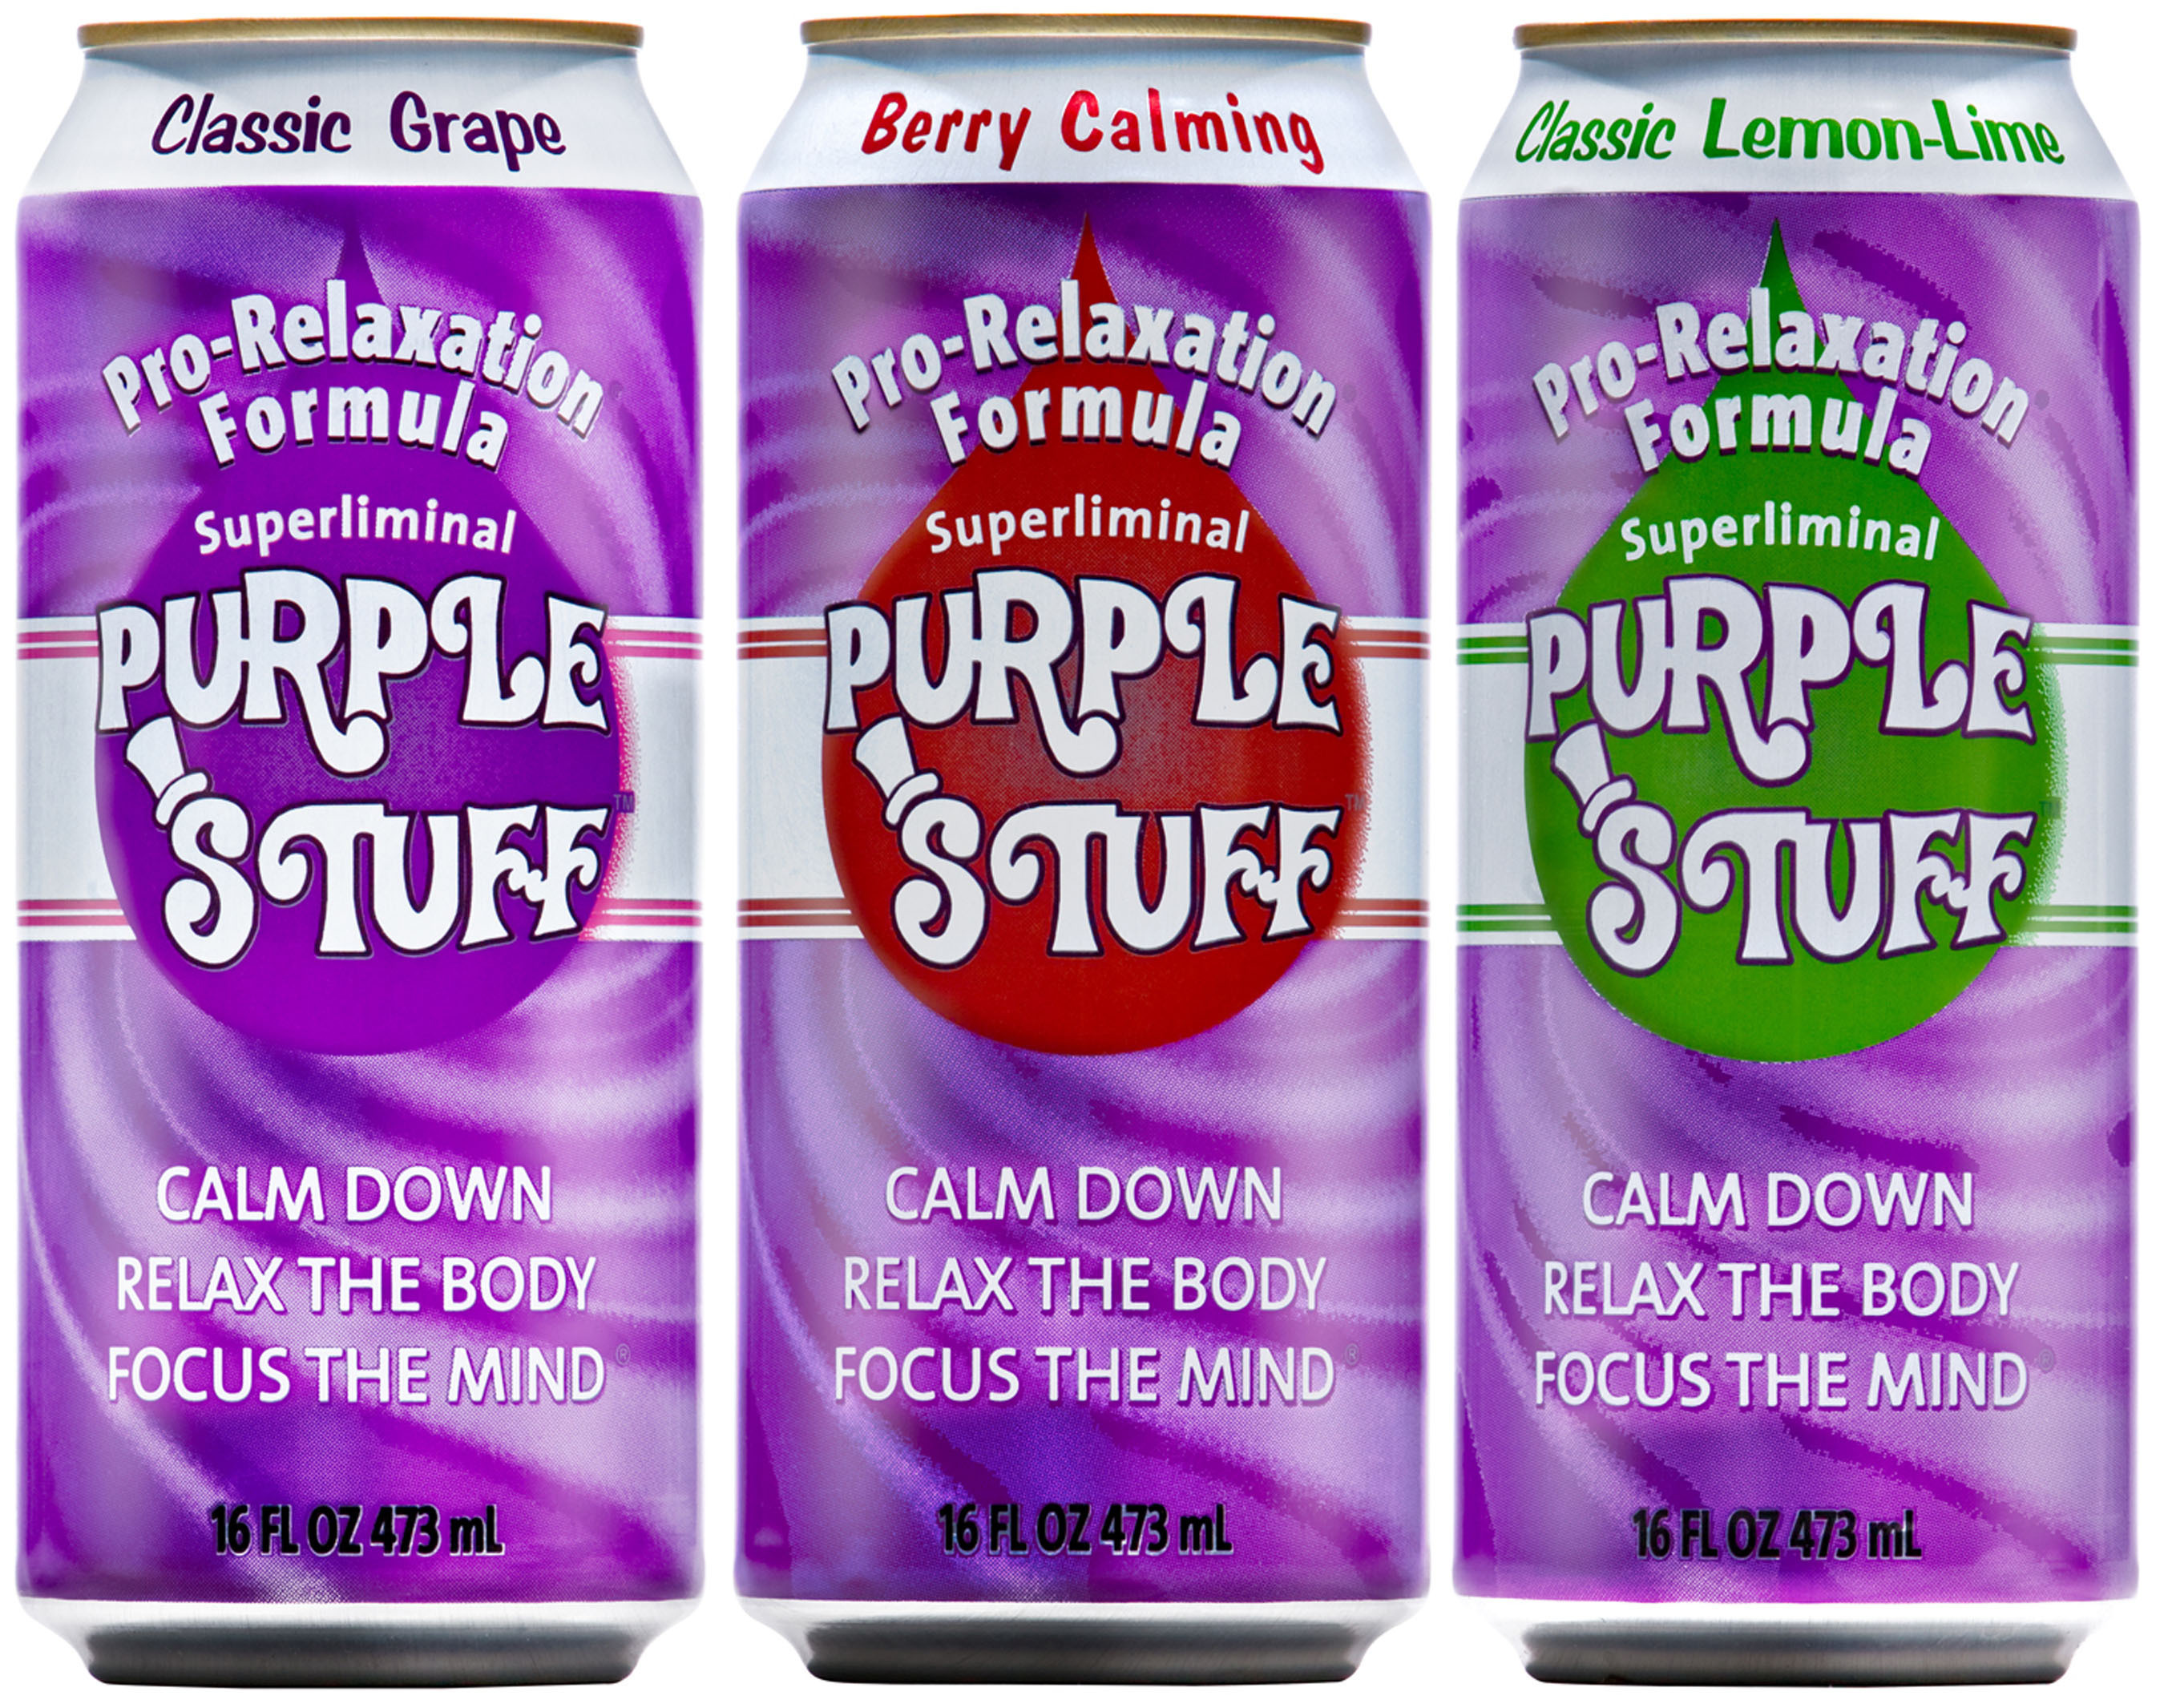 Funktional Beverages, Inc. - Superliminal Purple Stuff(R) is the best tasting performance enhancing cognitive soda on the market today. With hundreds of thousands of Facebook fans at  www.Facebook.com/MyPurpleStuff this is the brand the young soda drinkers are looking for. Superliminal Purple Stuff is quickly adding new markets of availability and is currently available across 28 states within the United States including Hawaii and Alaska and internationally in Mexico. (PRNewsFoto/Funktional Beverages, Inc., Bradford Carr) (PRNewsFoto/)